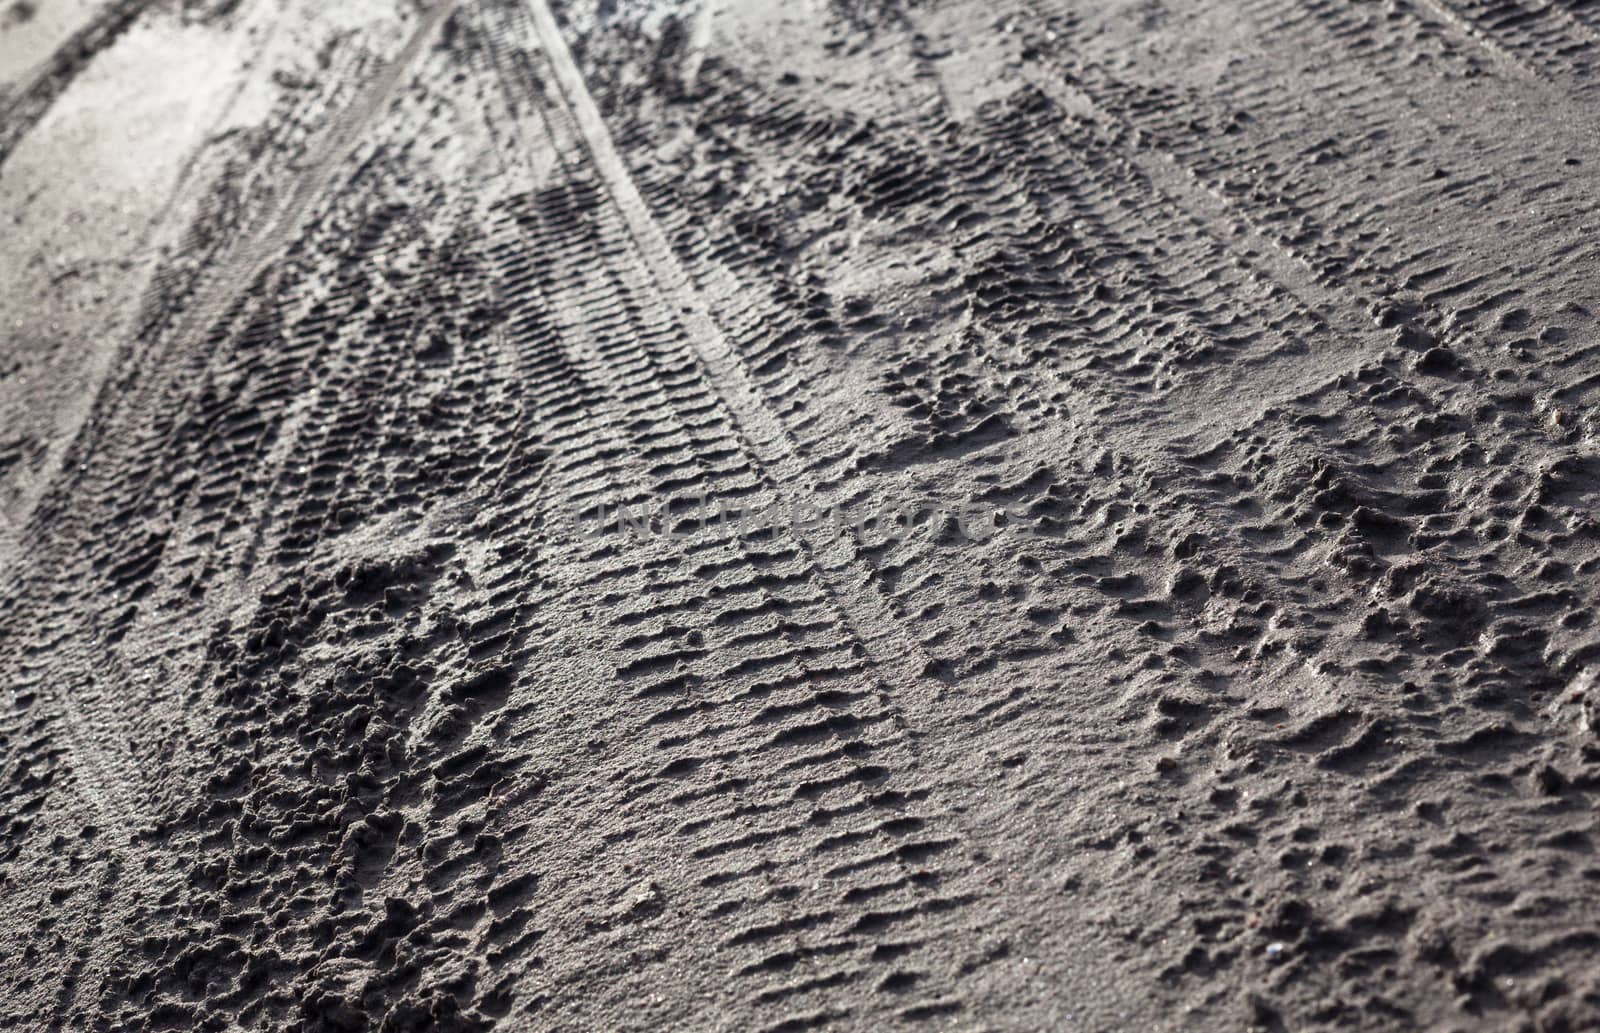 Wheel tracks on the dirt road by rootstocks